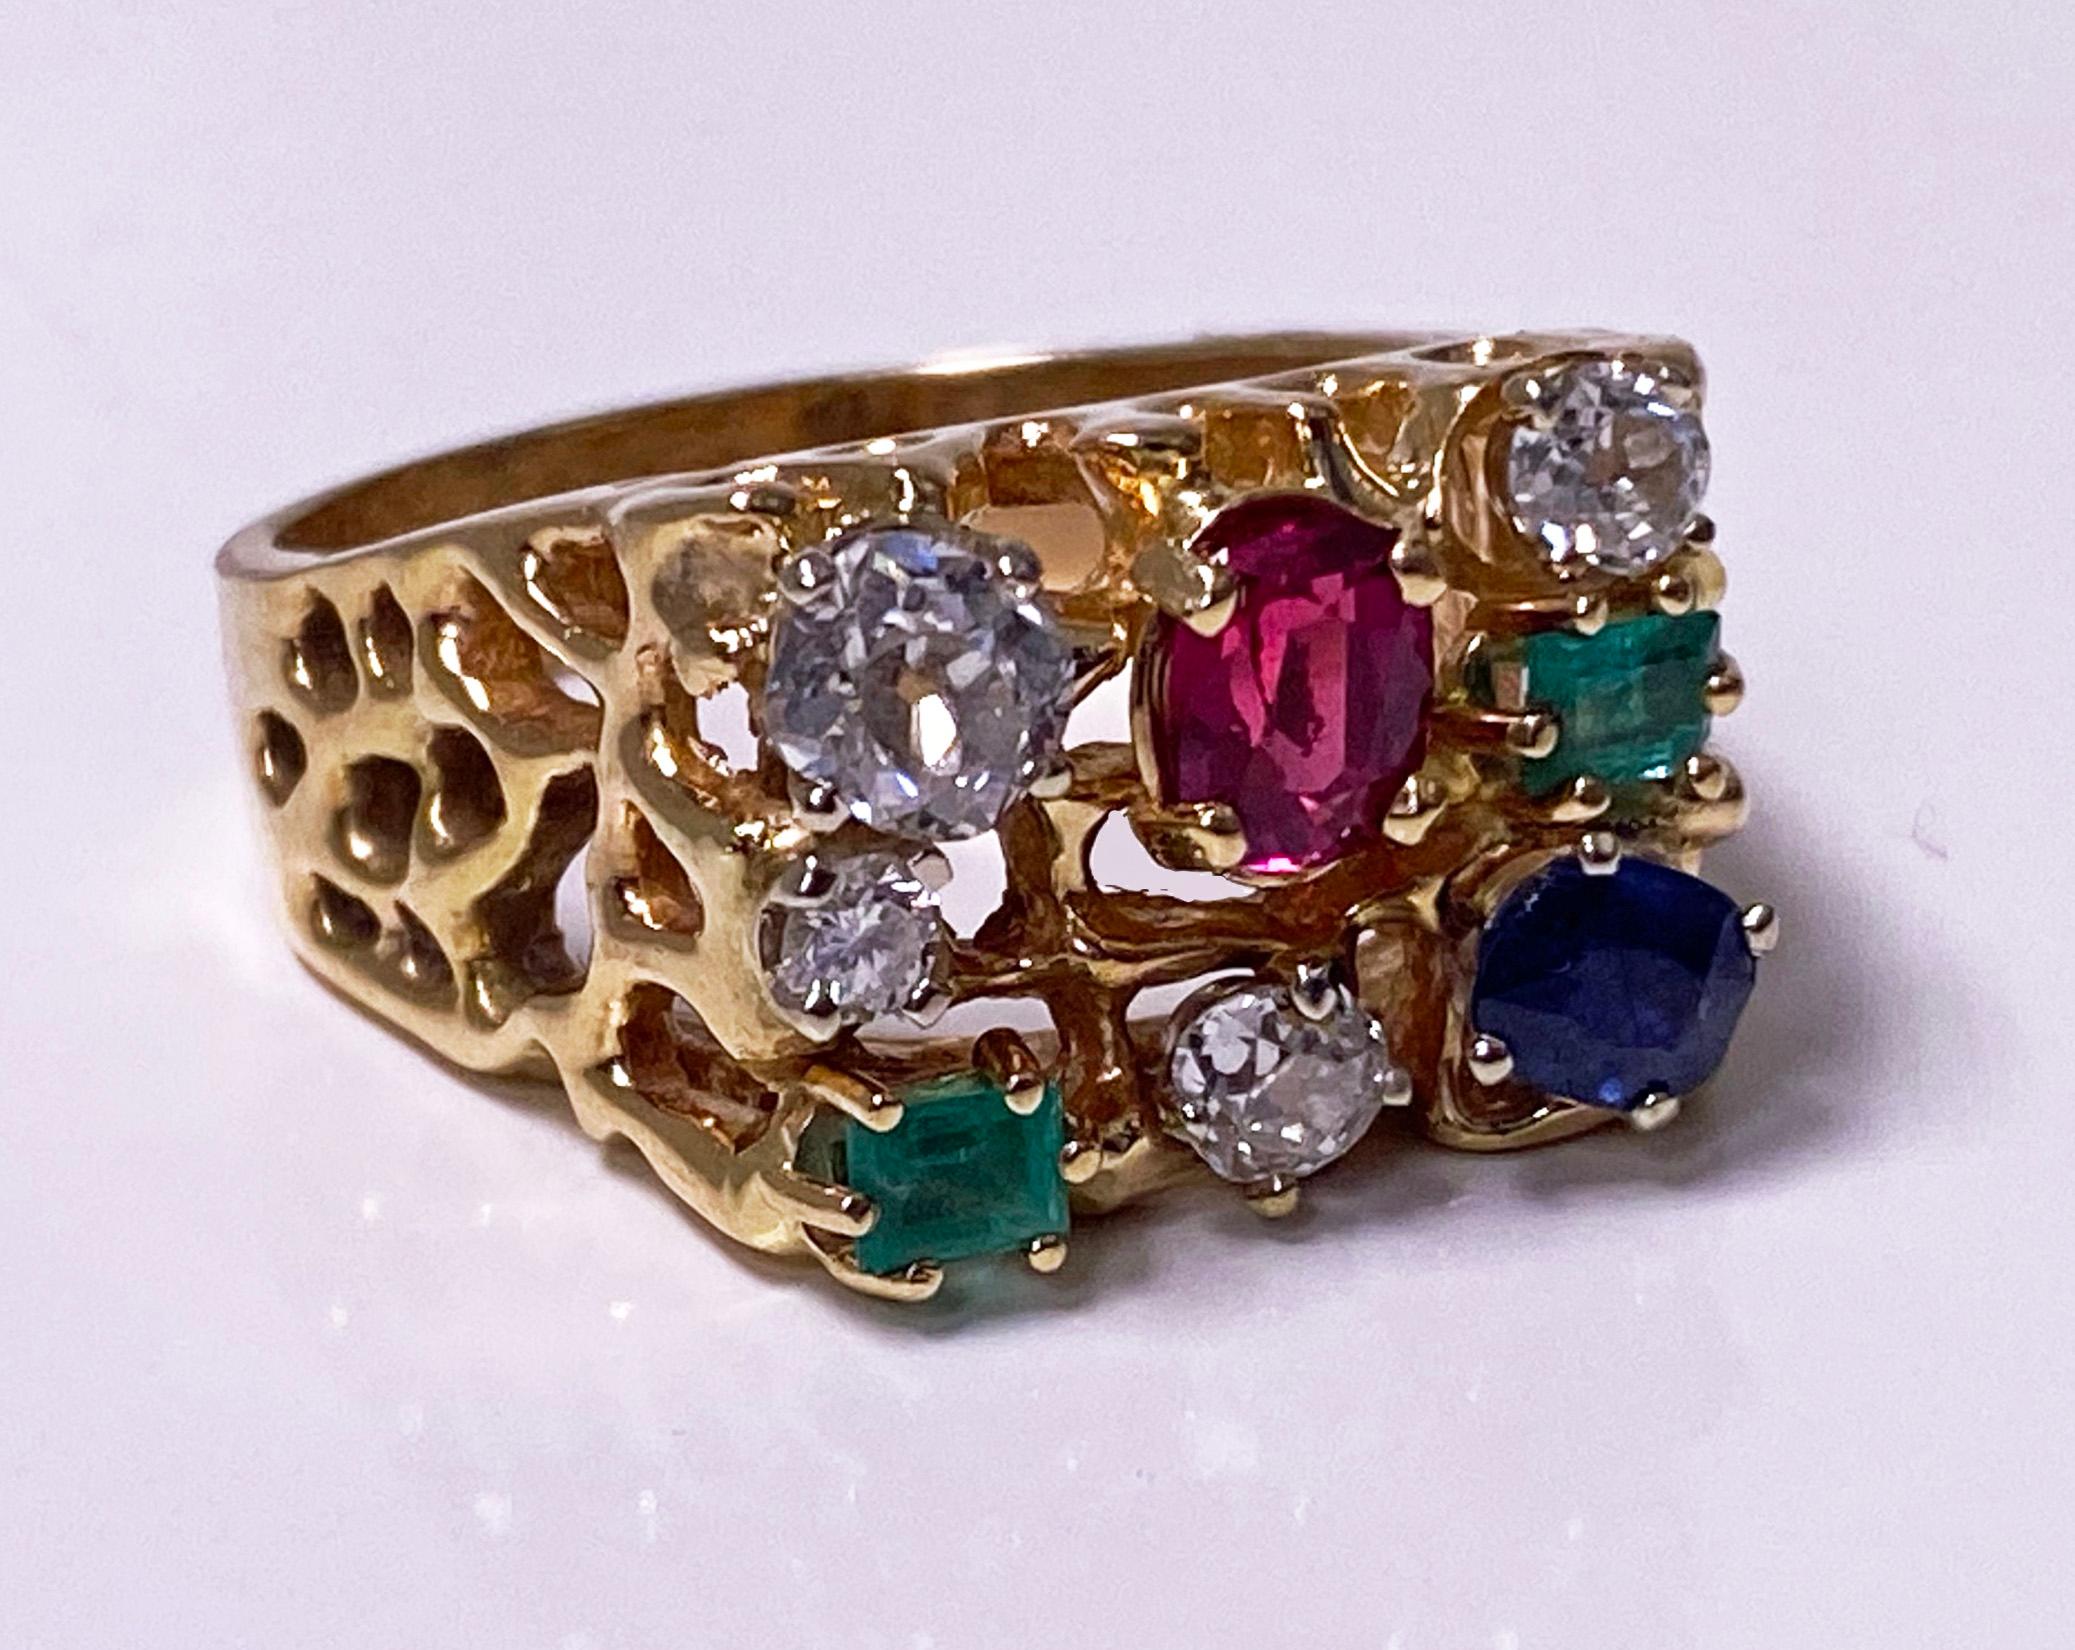 1960’s colorful Gold and Gemstone Ring. The custom made Ring of a rectangular tutti fruti like form set with three old mine cut diamonds and a round brilliant cut diamond, total diamond weight approximately 1.15 ct, average SI1 clarity, average I-K